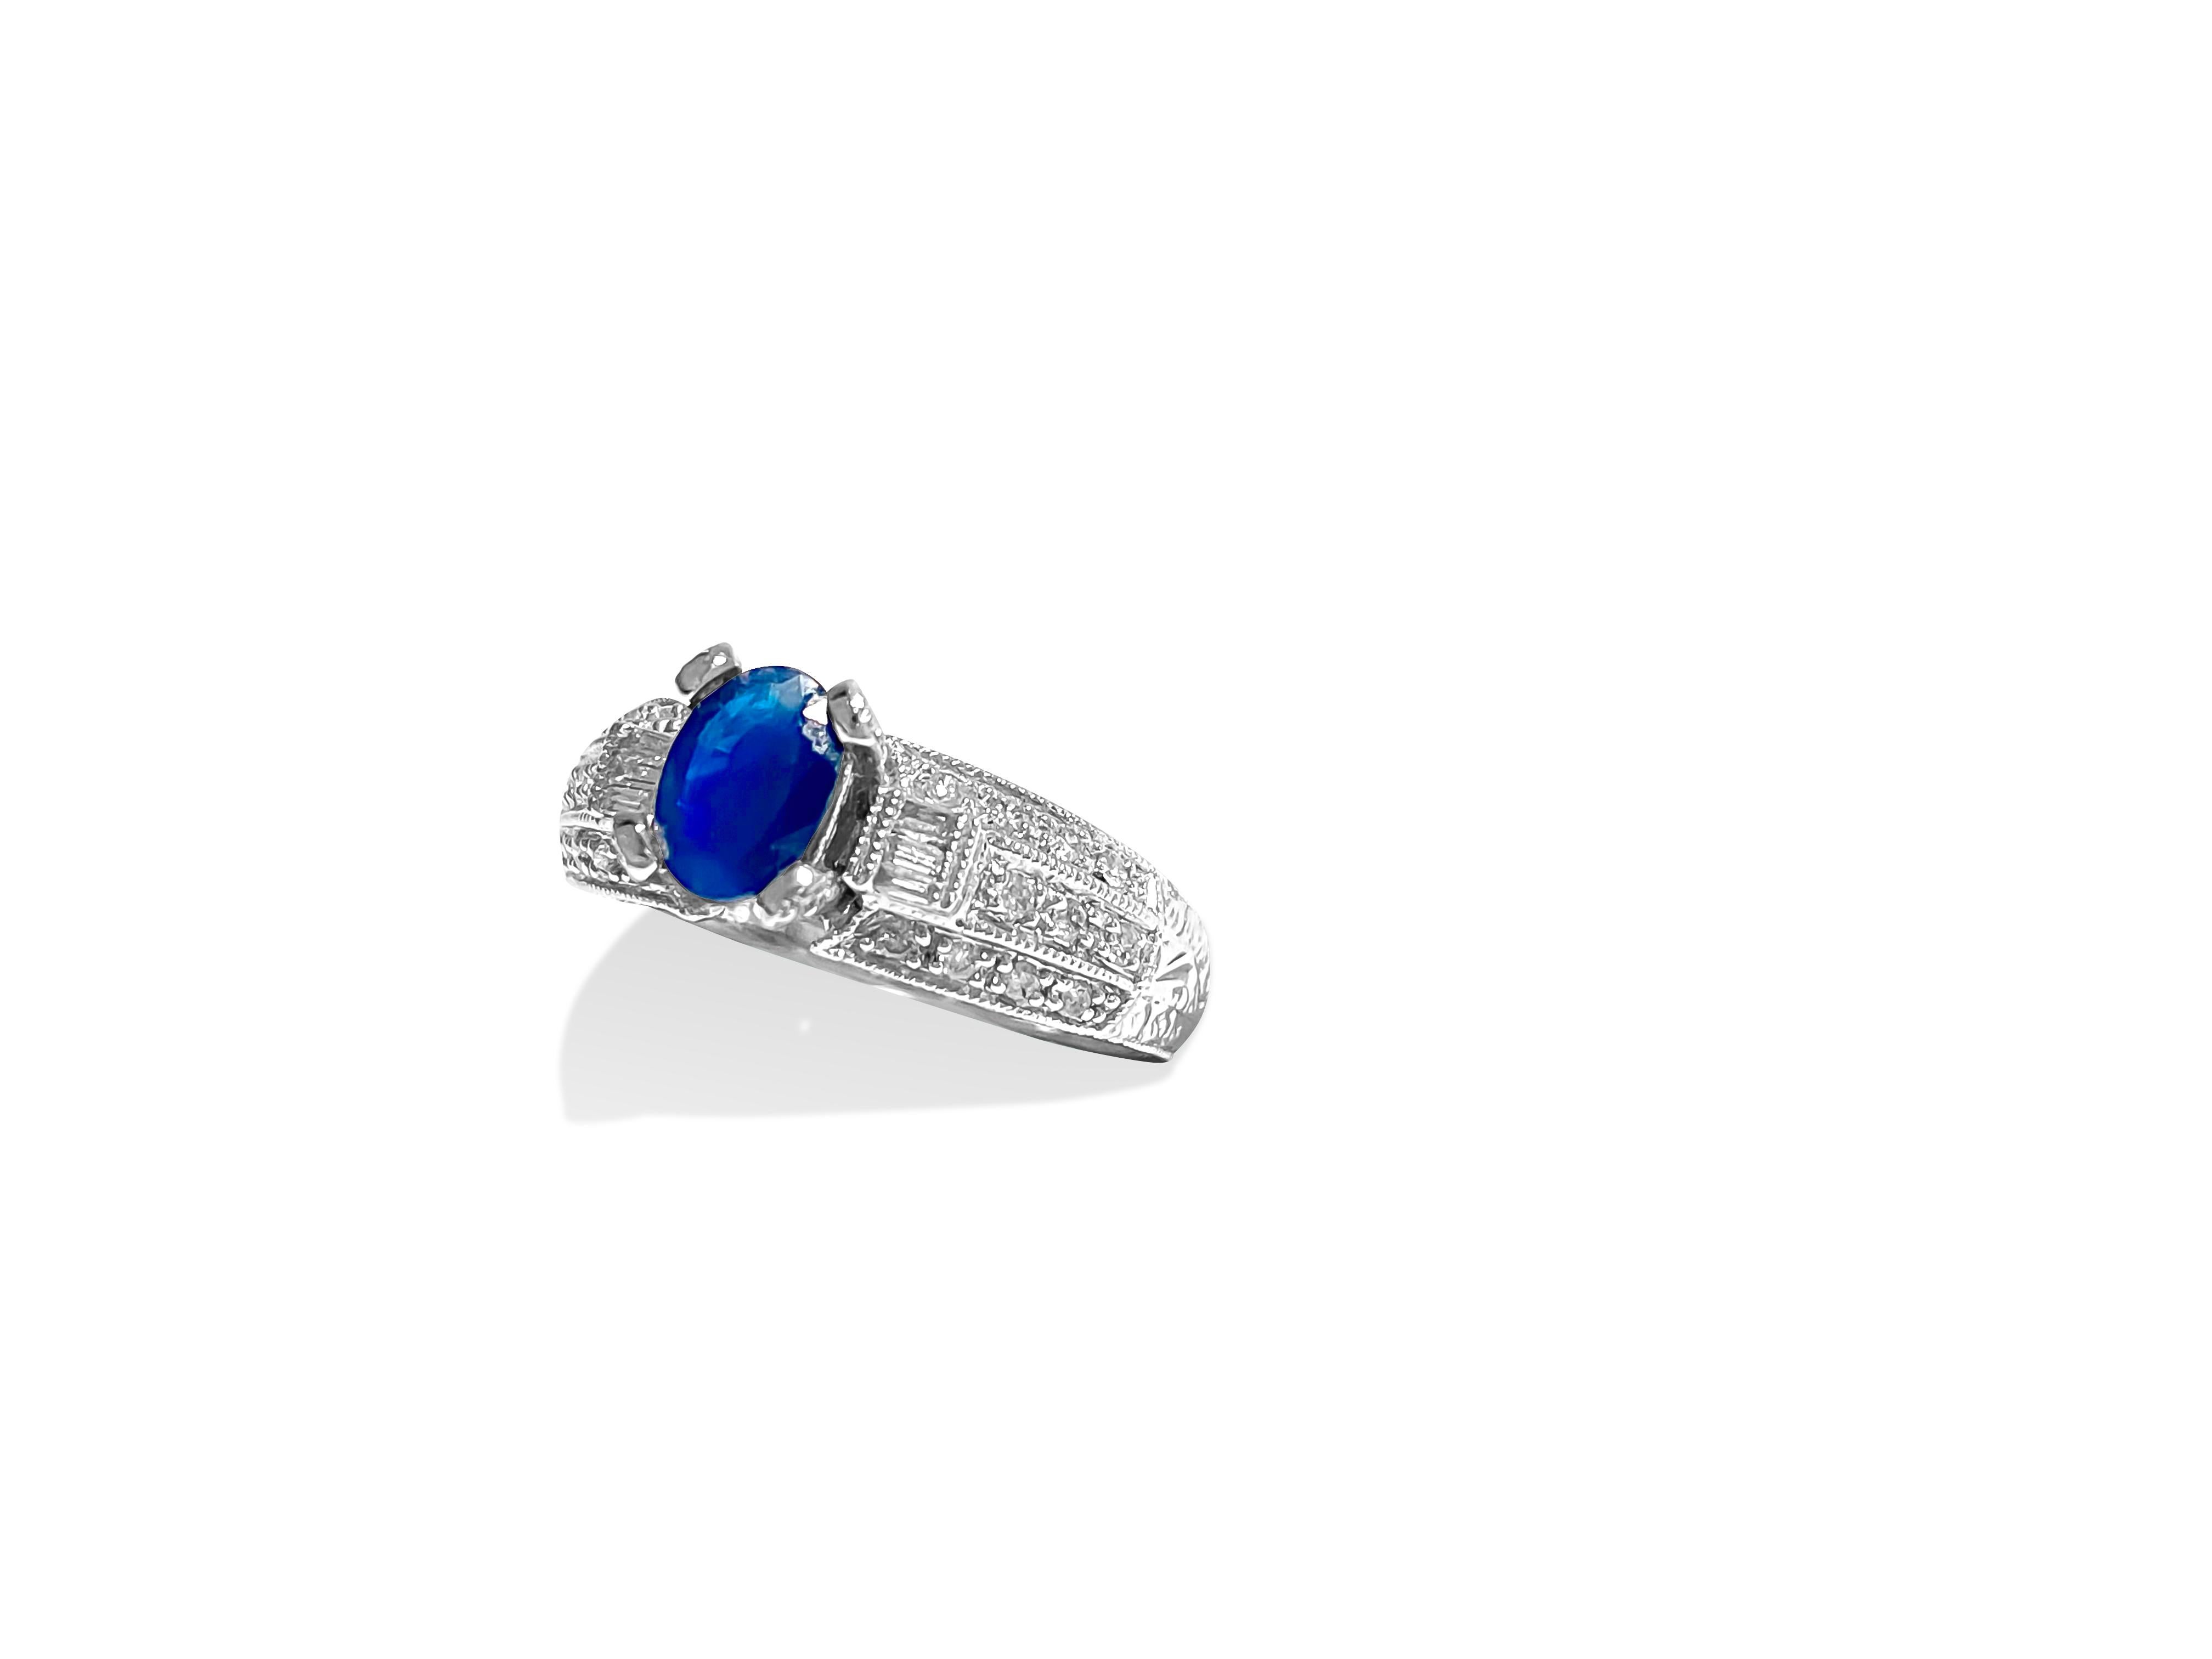 Metal: 18k white gold

Blue Sapphire: 1.50 carat center. Oval shape set in prongs. 100% natural earth mined. Cornblue color and deep saturation 

Diamonds: 1.00 carats total. VS-SI clarity and G-H color. 
Round brilliant and baguette cut diamonds.